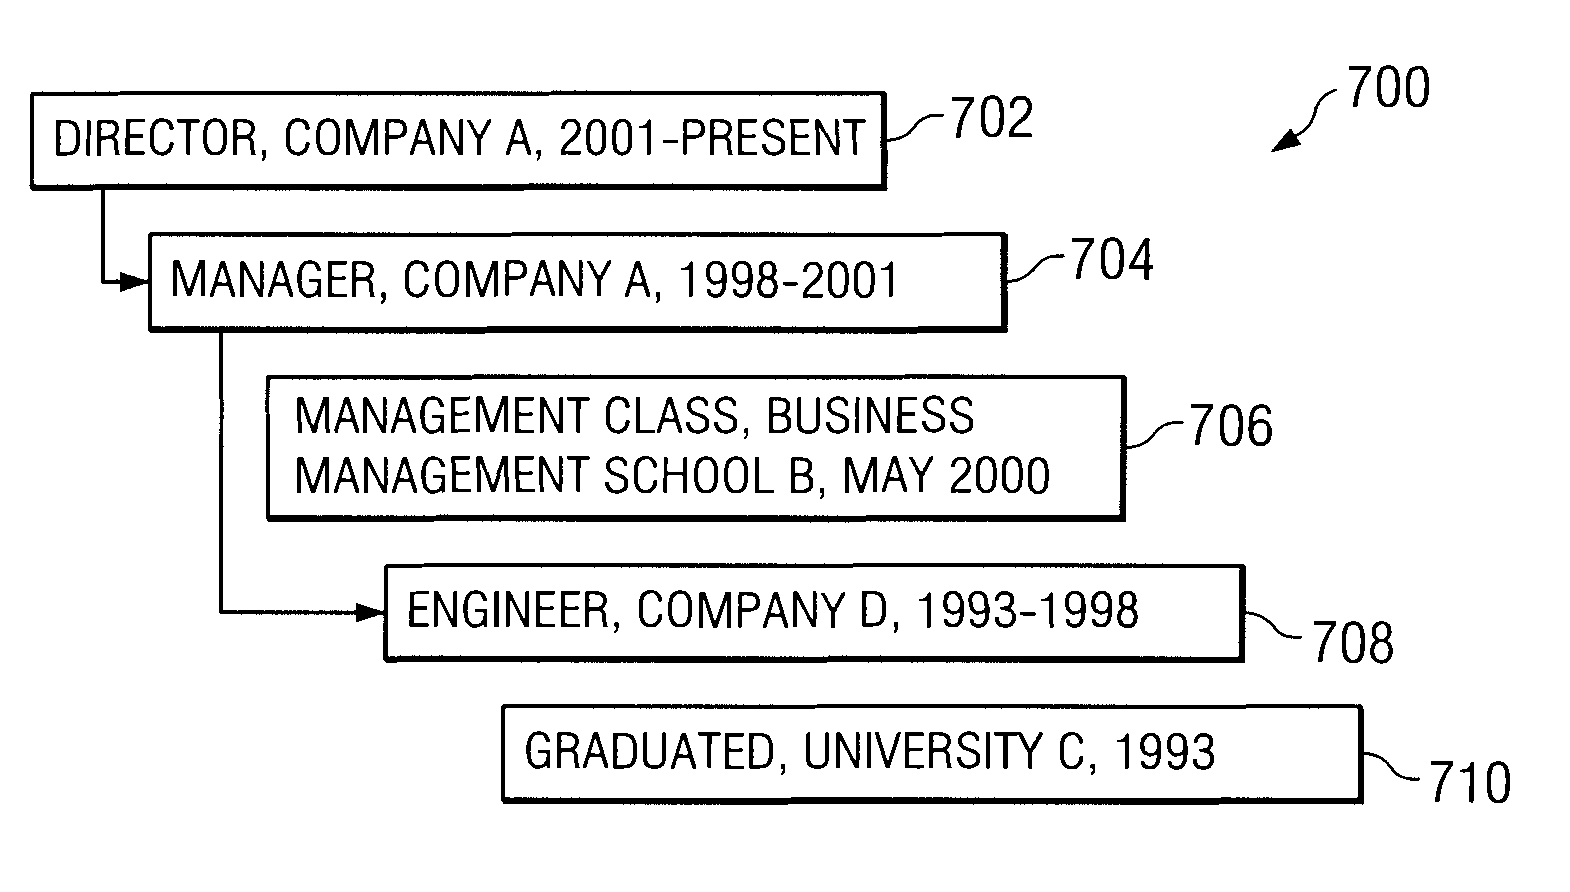 Coordinated employee records with version history and transition ownership